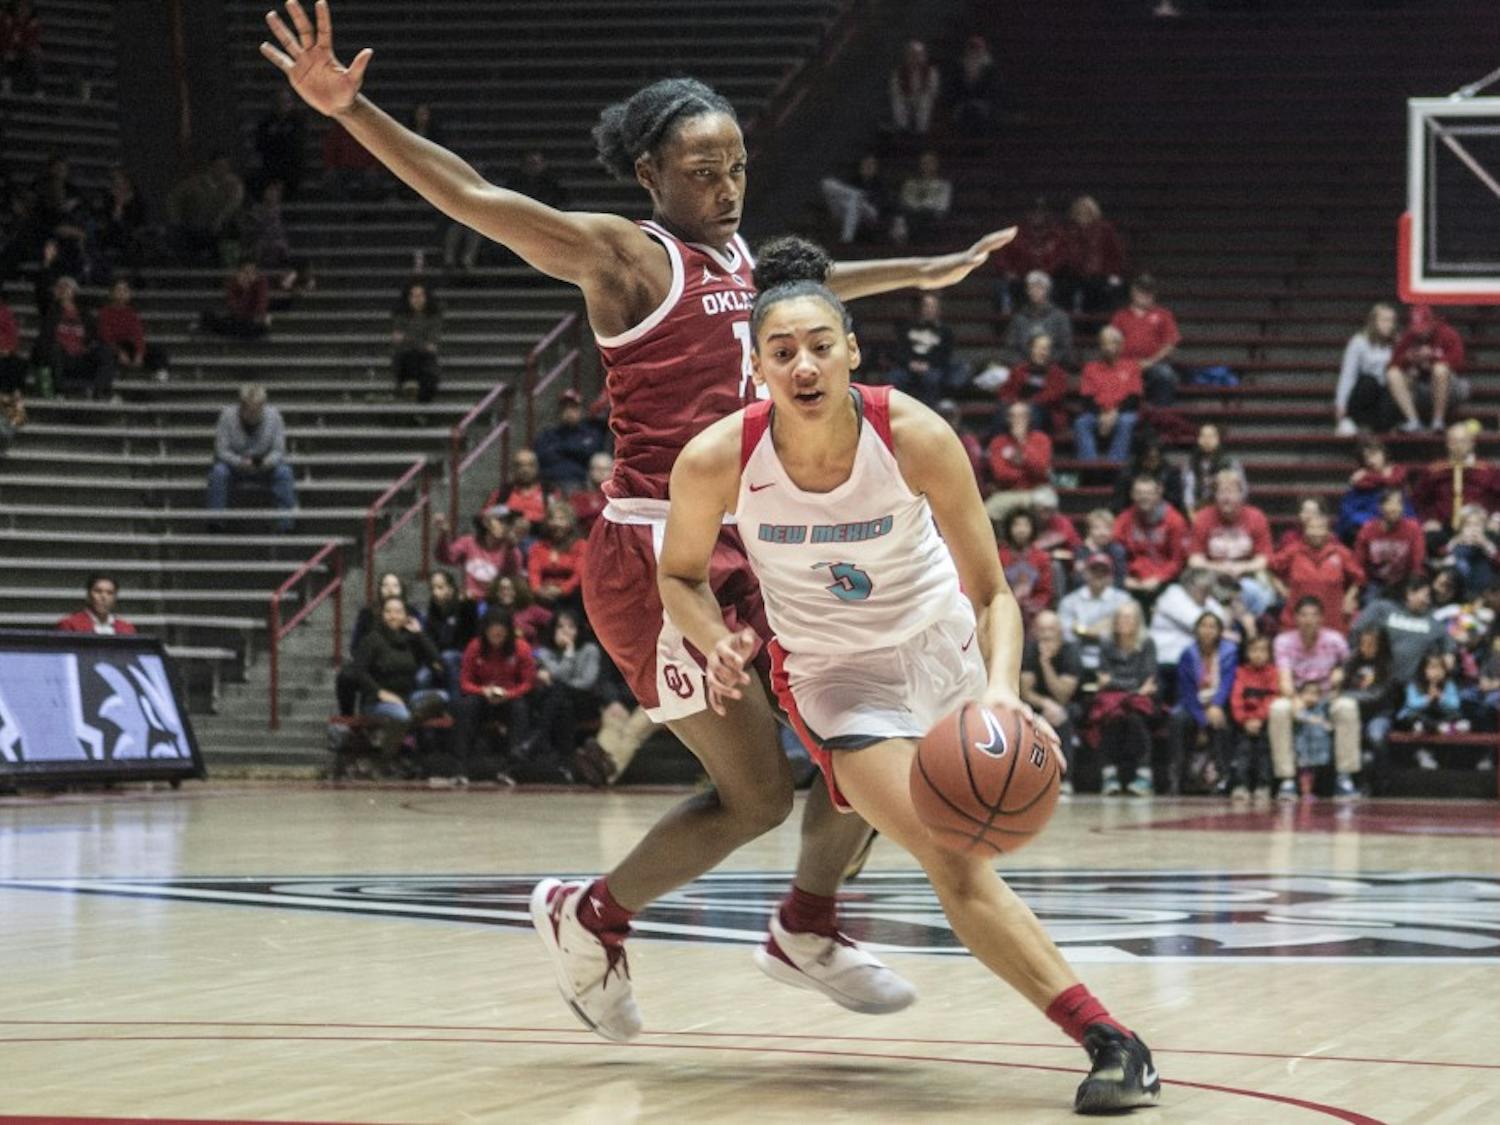 Ahlise Hurst drives to the basket past Shaina Pellington during the second half of Wednesday’s game at Dreamstyle Arena. Hurst scored 39 points to set a new freshman scoring record to lead the Lobos to an 84-80 victory.